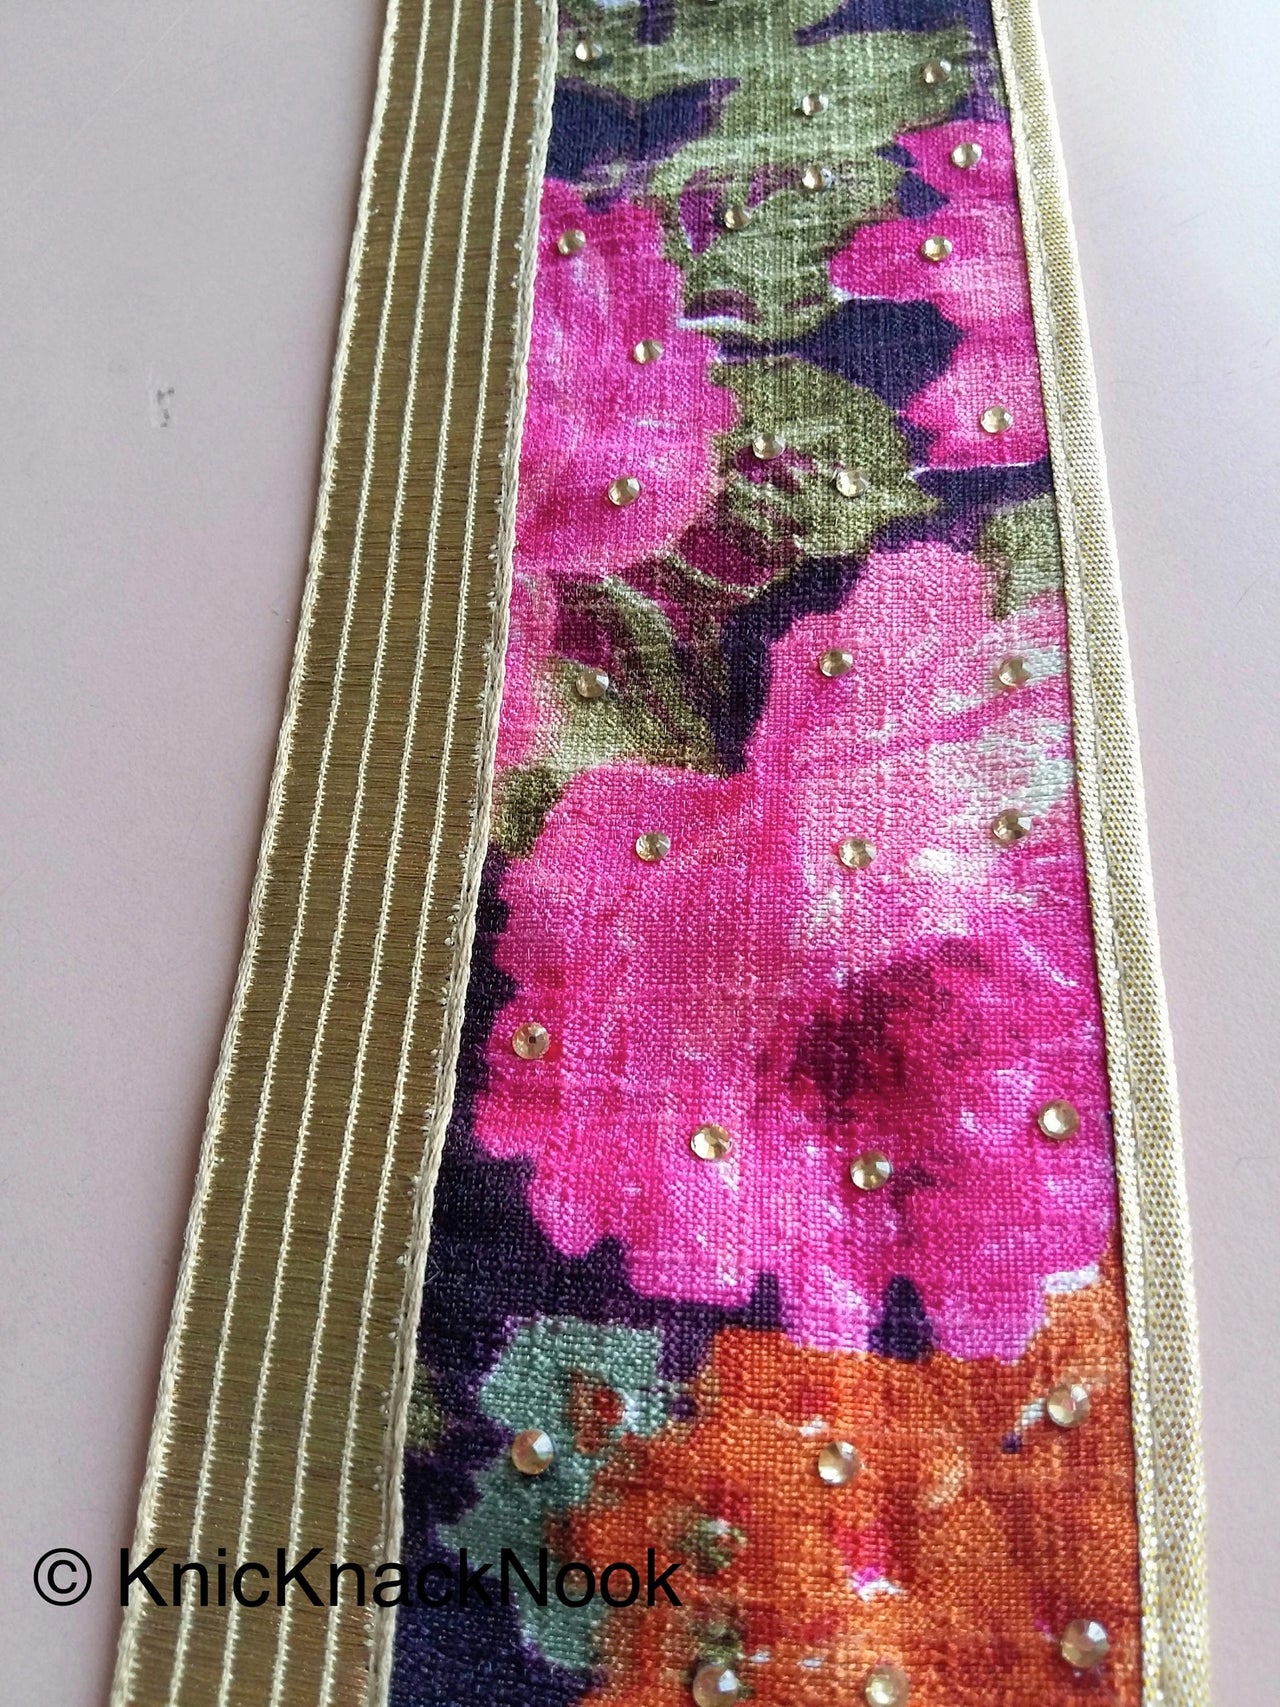 Purple And Gold Fabric Trim With Fuchsia, Green And Orange Floral Design Embellished With Diamantes, Digital Print Trim Border - 200317L405